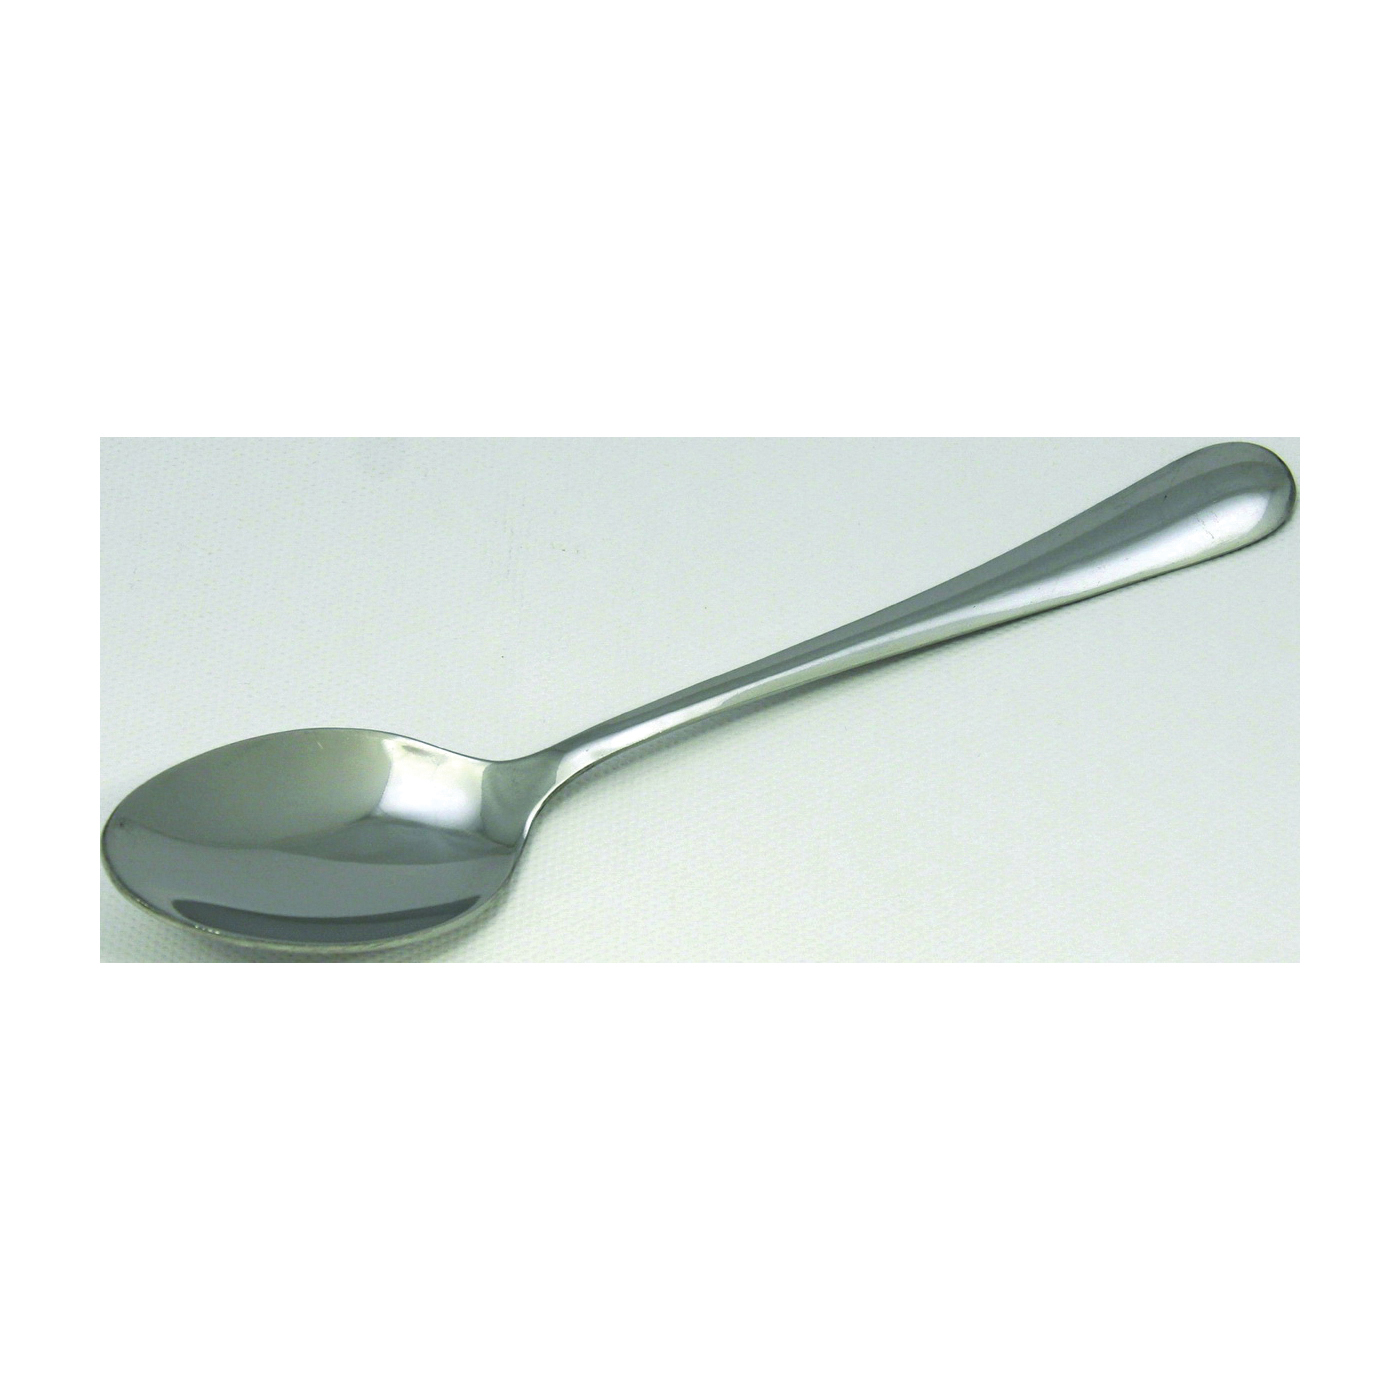 21712 Tablespoon Set, 7-1/2 in OAL, Stainless Steel